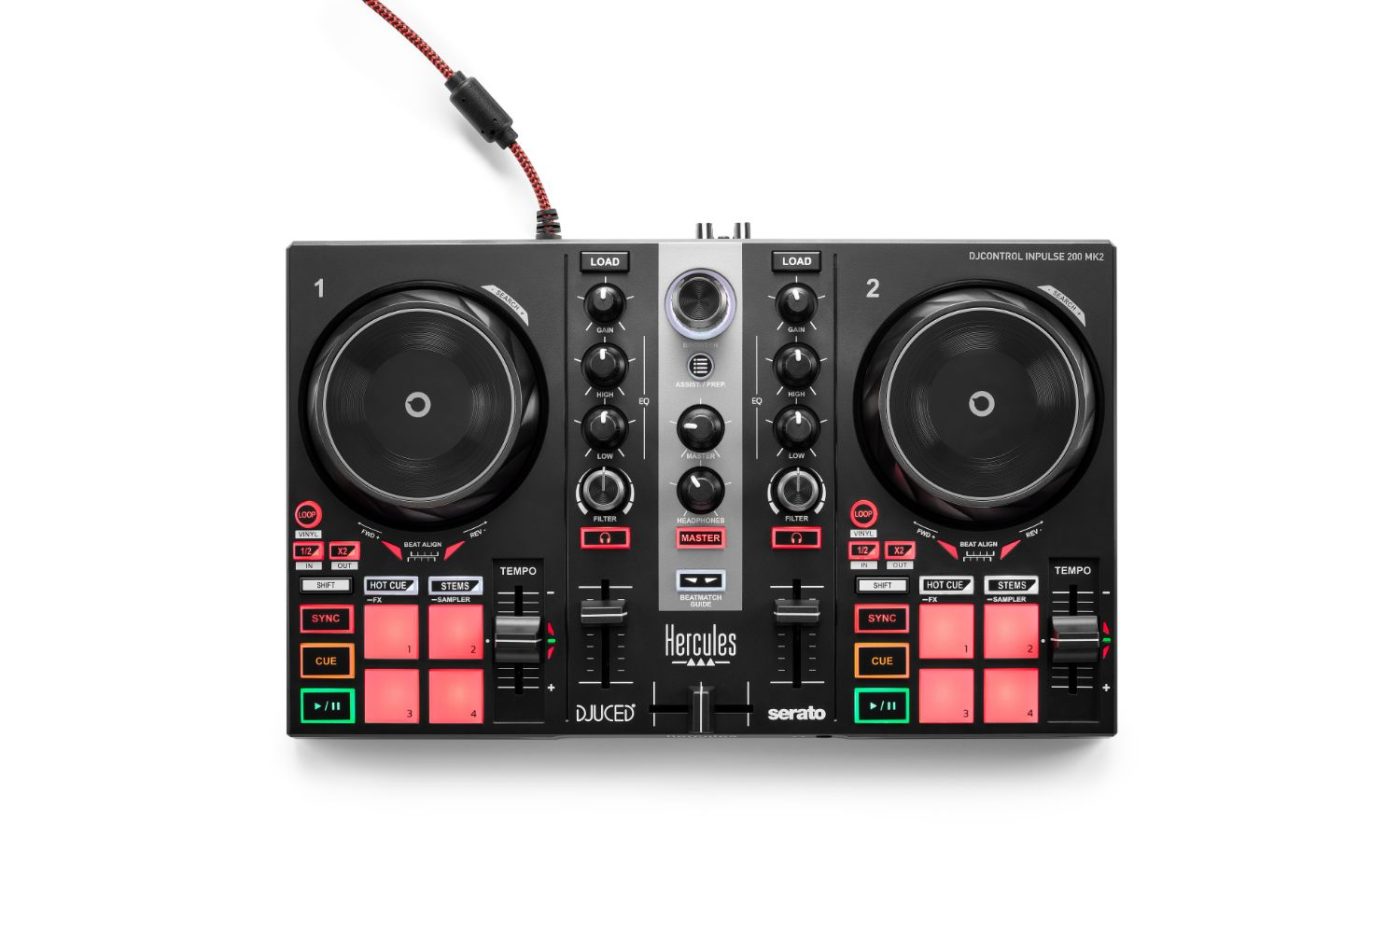 Hercules DJ Console Rmx vs Pioneer DDJ-SB: What is the difference?